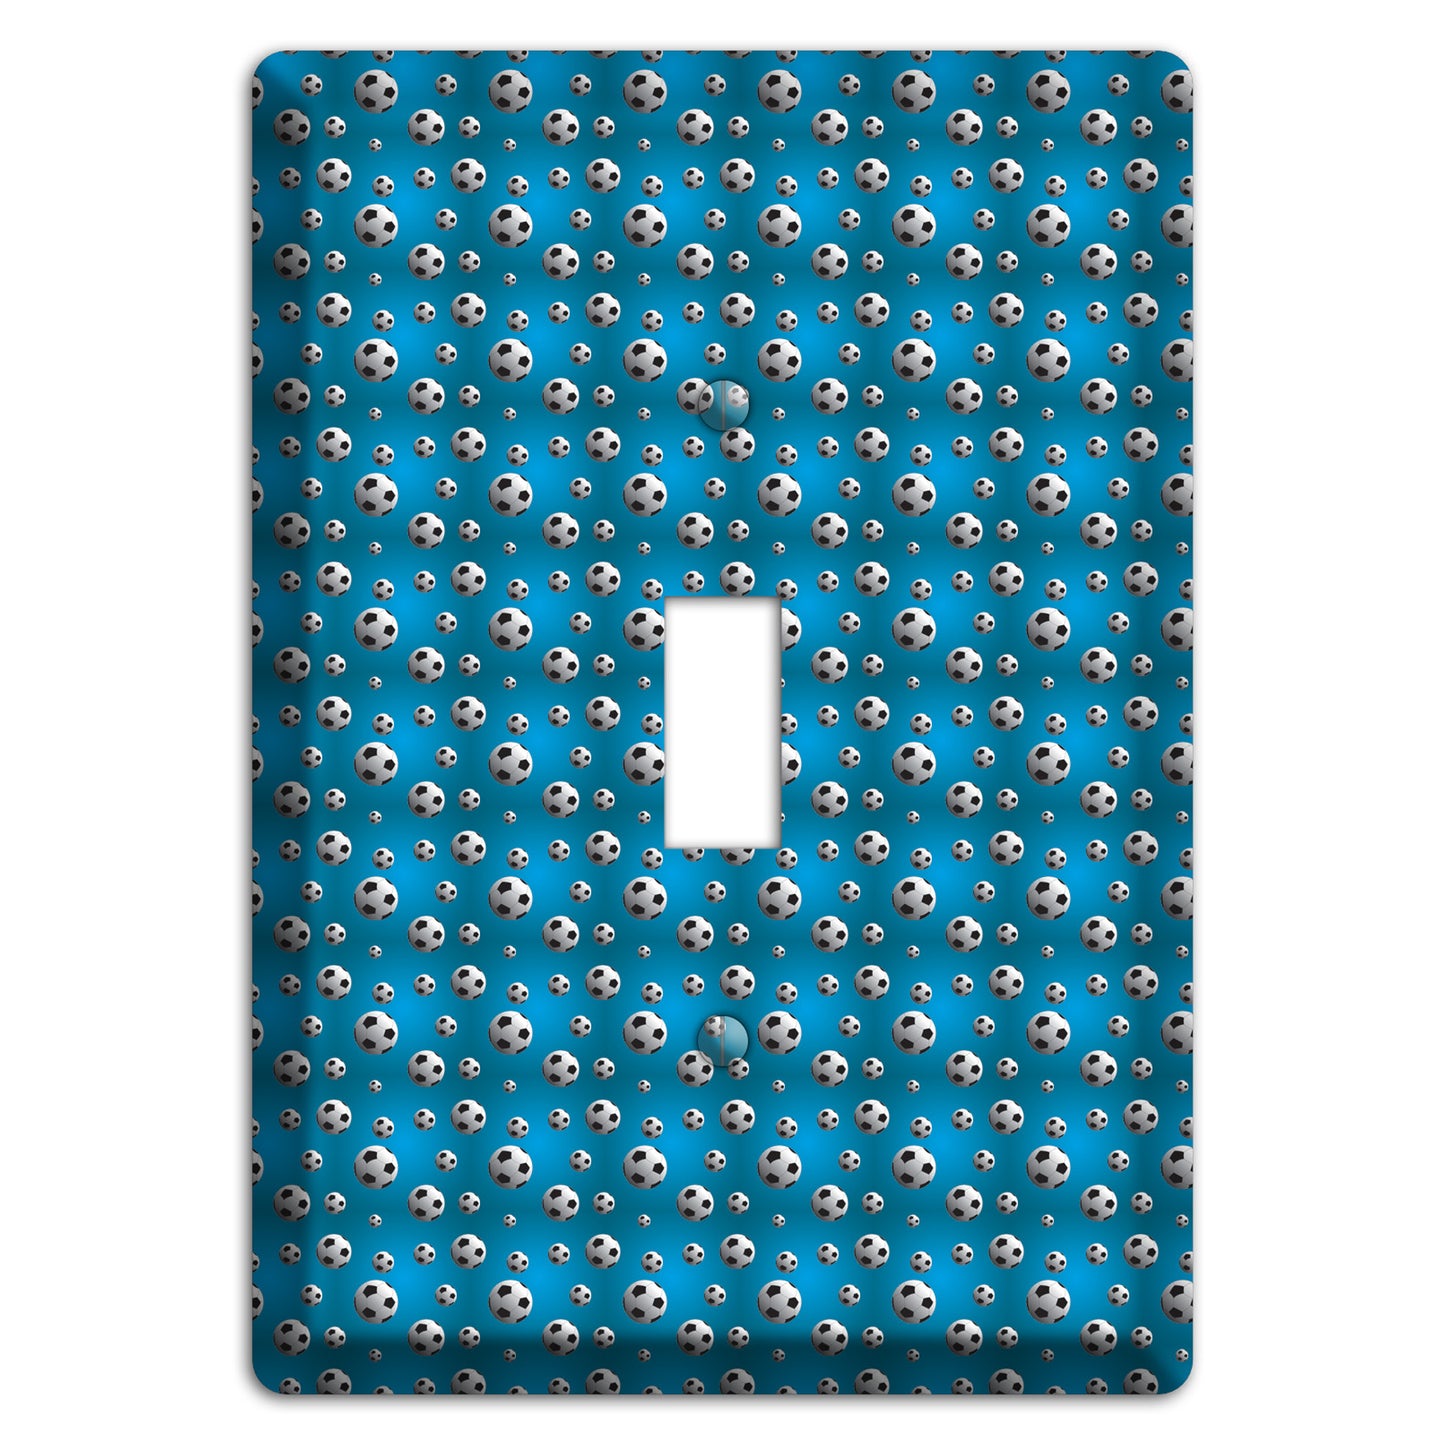 Blue with Soccer Balls Cover Plates